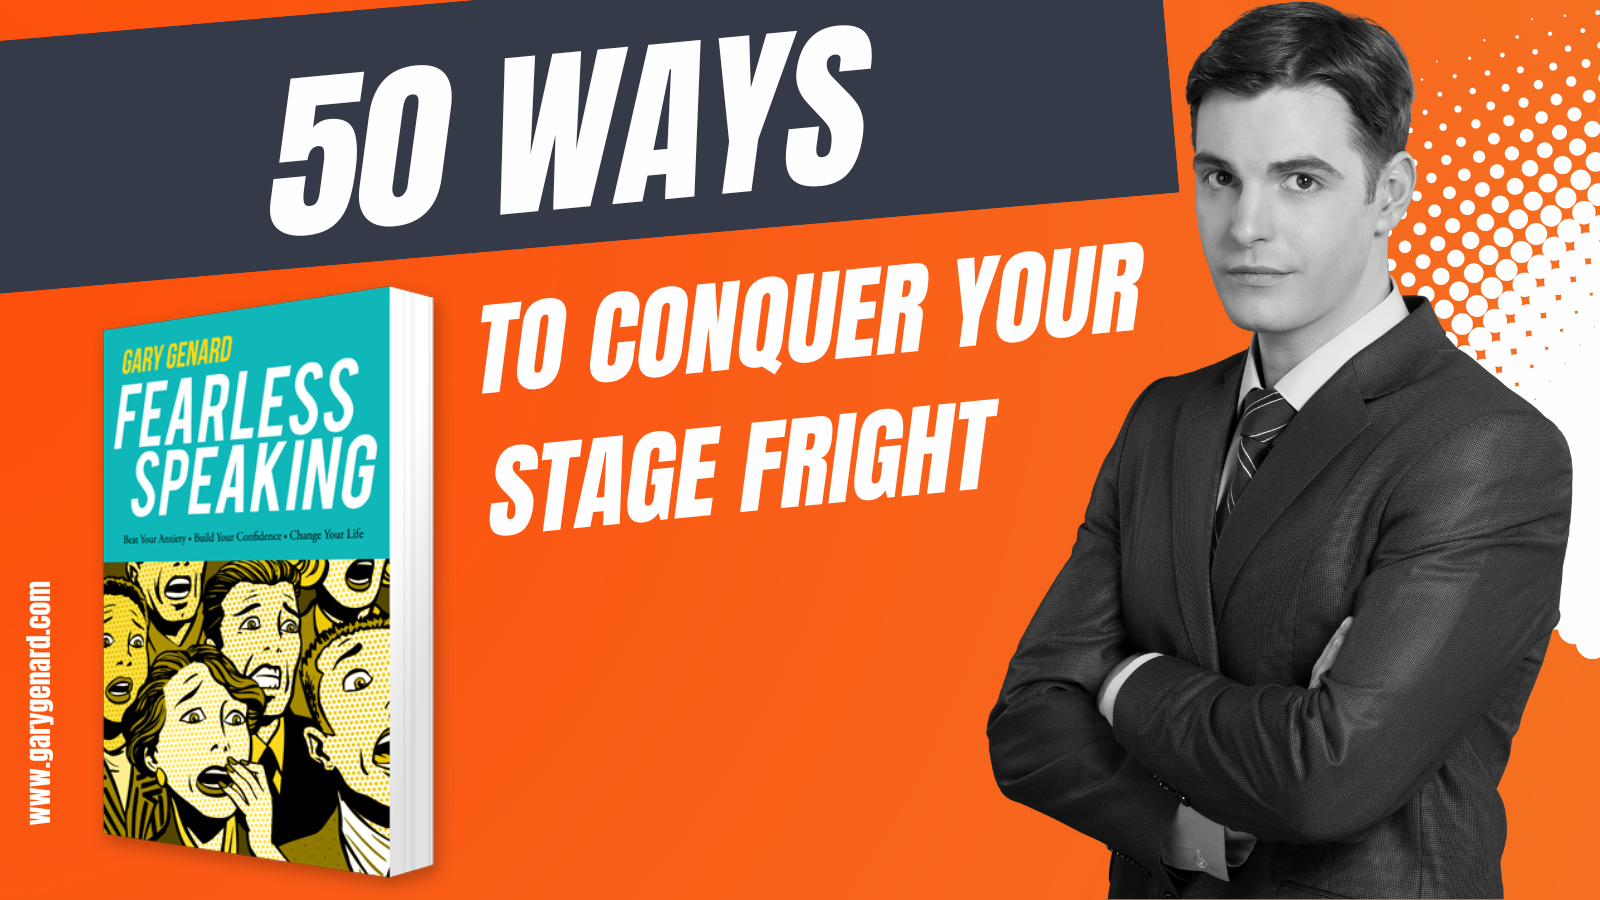 50 Ways To Conquer Your Stage Fright - Dr. Gary Genard's book Fearless Speaking